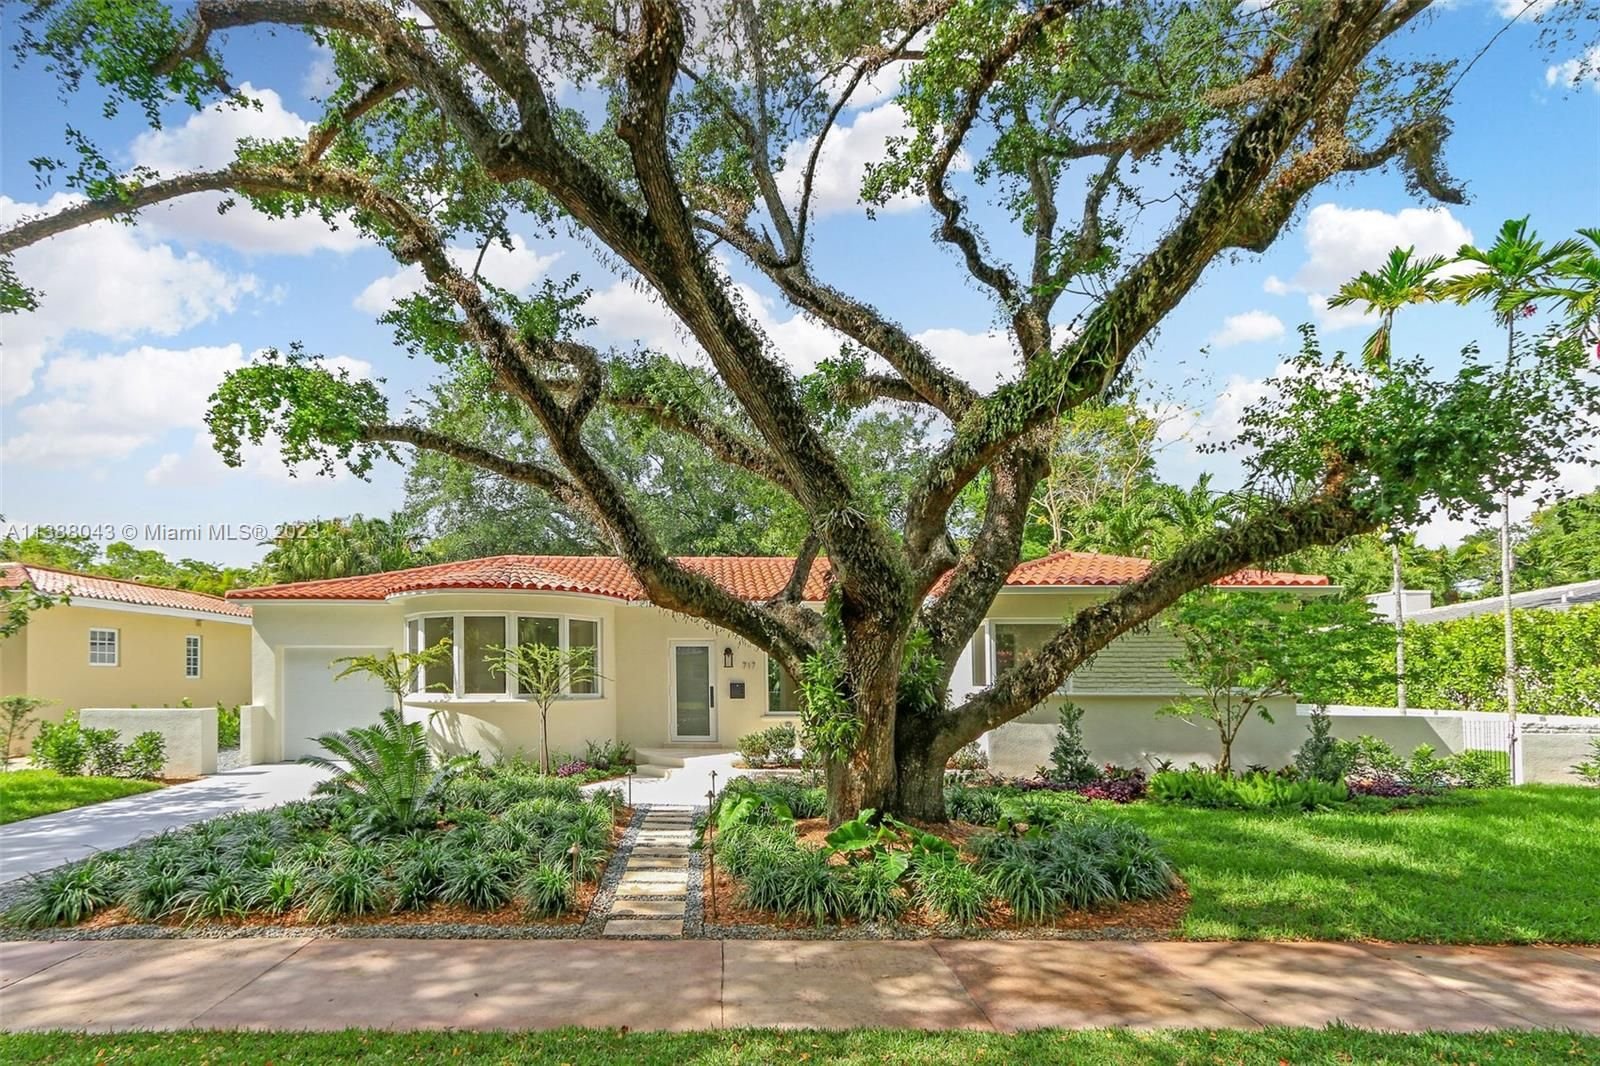 Real estate property located at 717 Santander Ave., Miami-Dade County, Coral Gables, FL